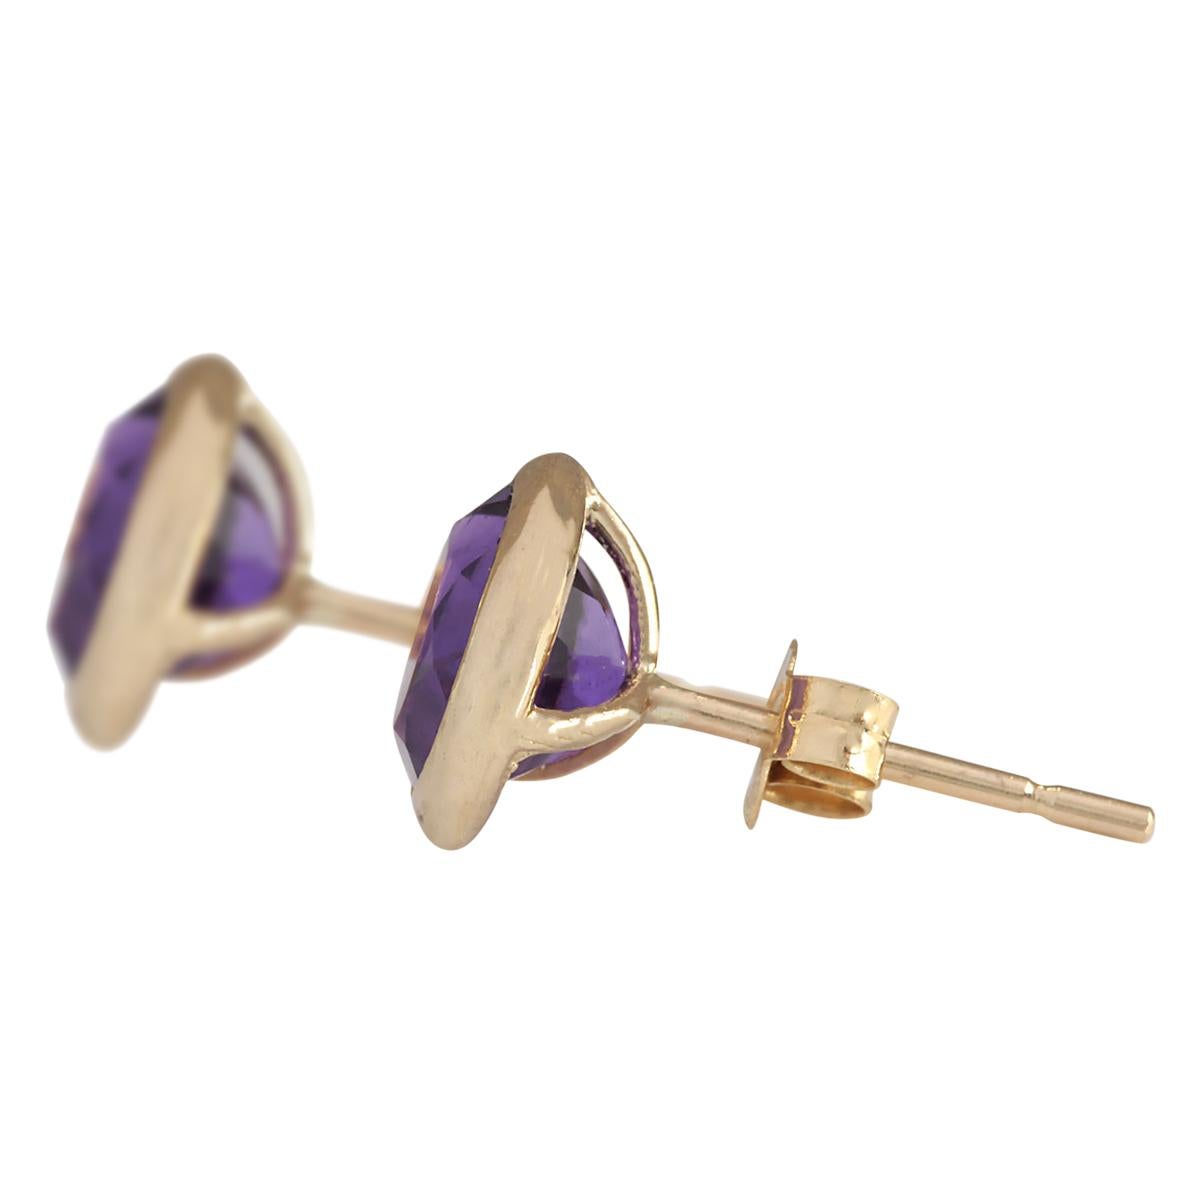 Stamped: 14K Yellow Gold
Total Earrings Weight: 1.8 Grams
 Total Natural Amethyst Weight is 3.00 Carat (Measures: 7.00x7.00 mm)
Color: Purple
Face Measures: 8.90x8.90 mm
Sku: [703314W]